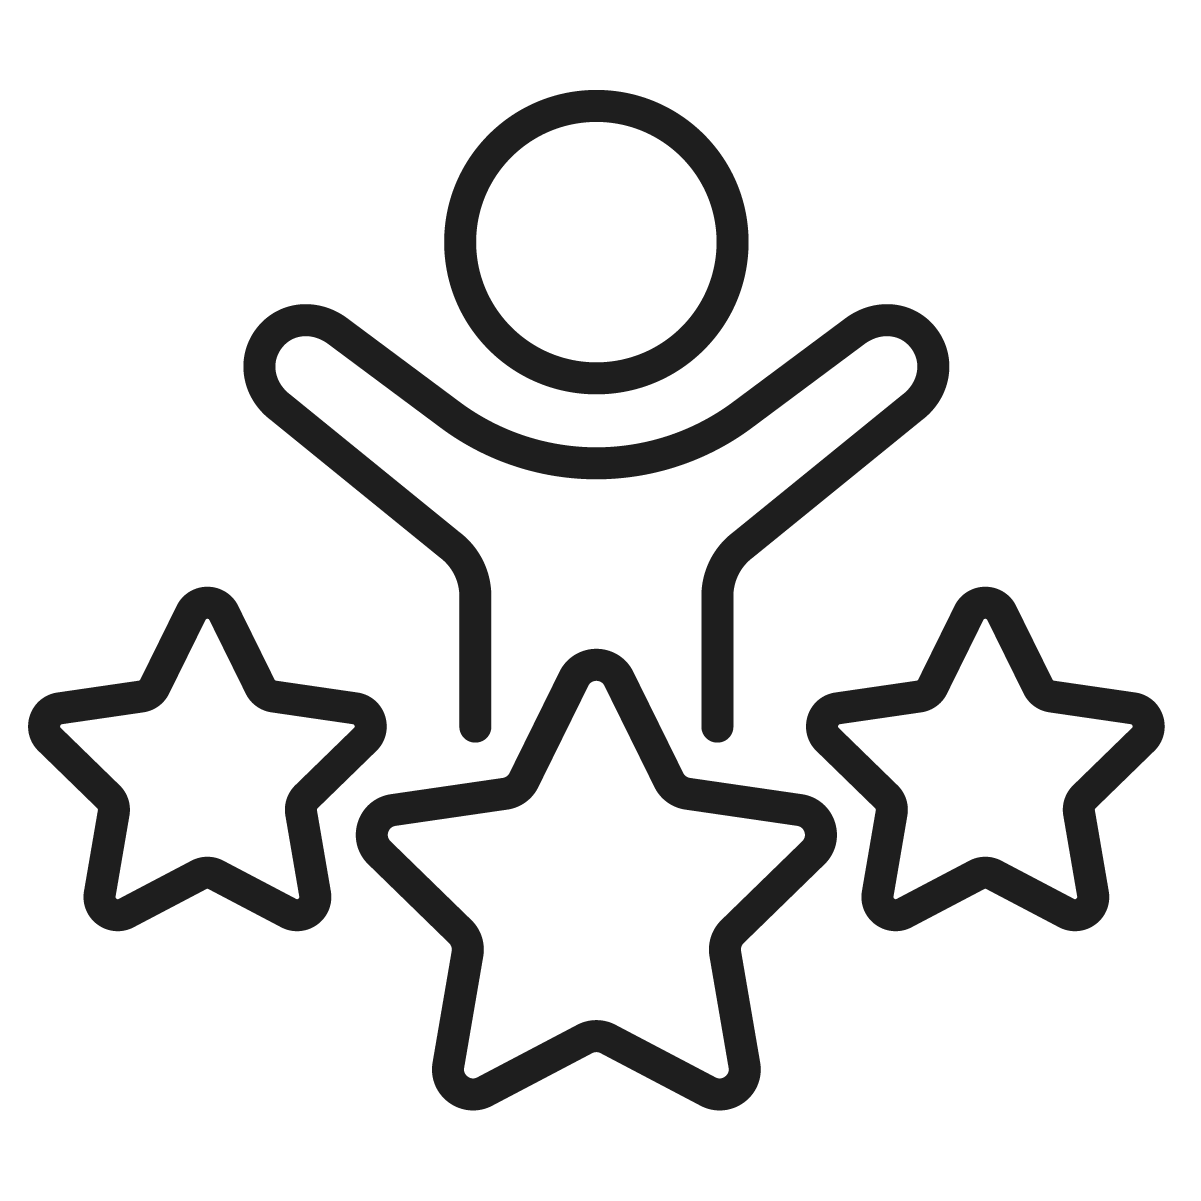 black and white outline of a person on top of 3 stars that are in a roll